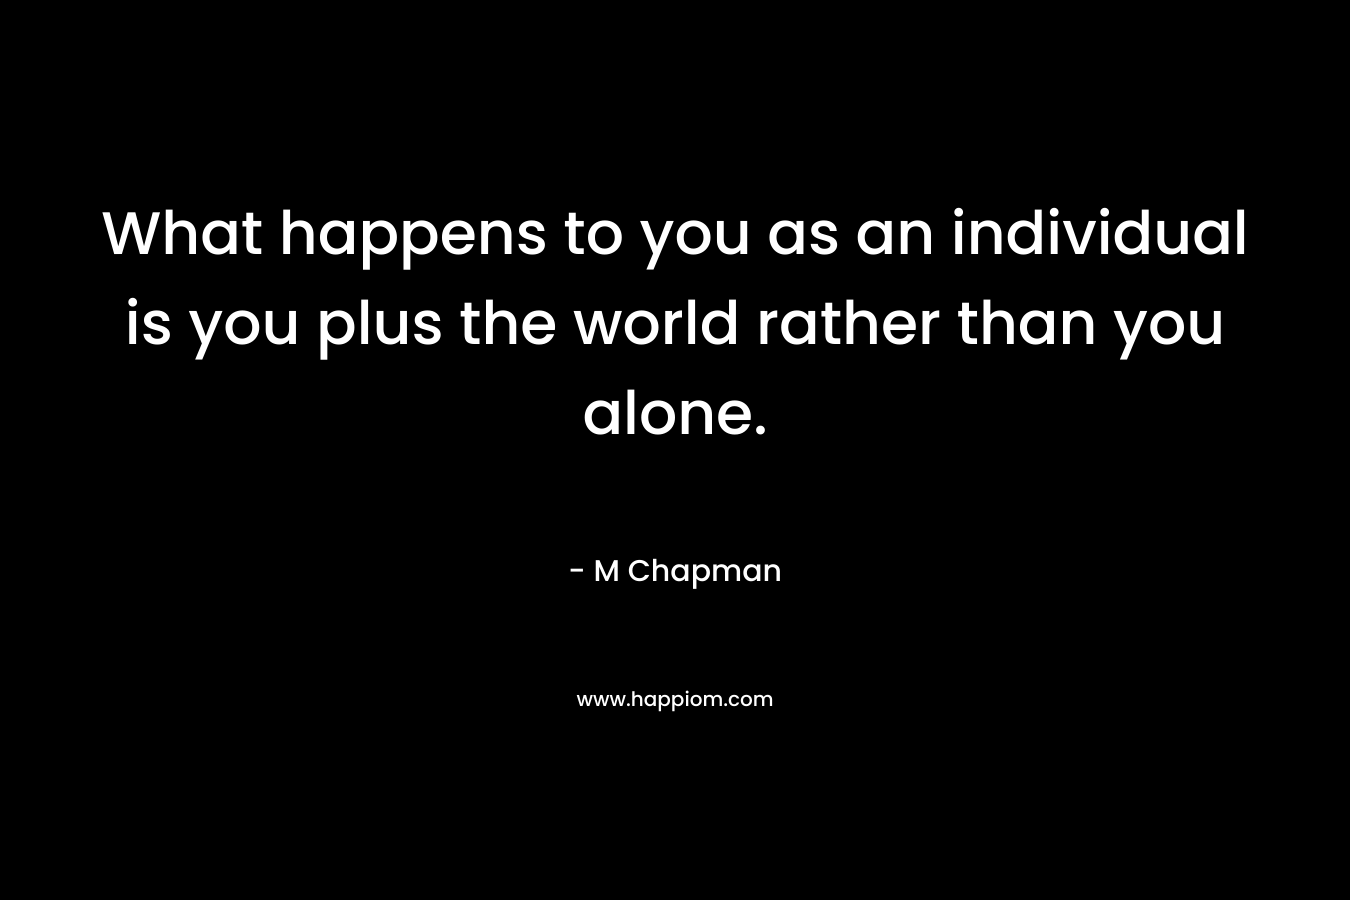 What happens to you as an individual is you plus the world rather than you alone.